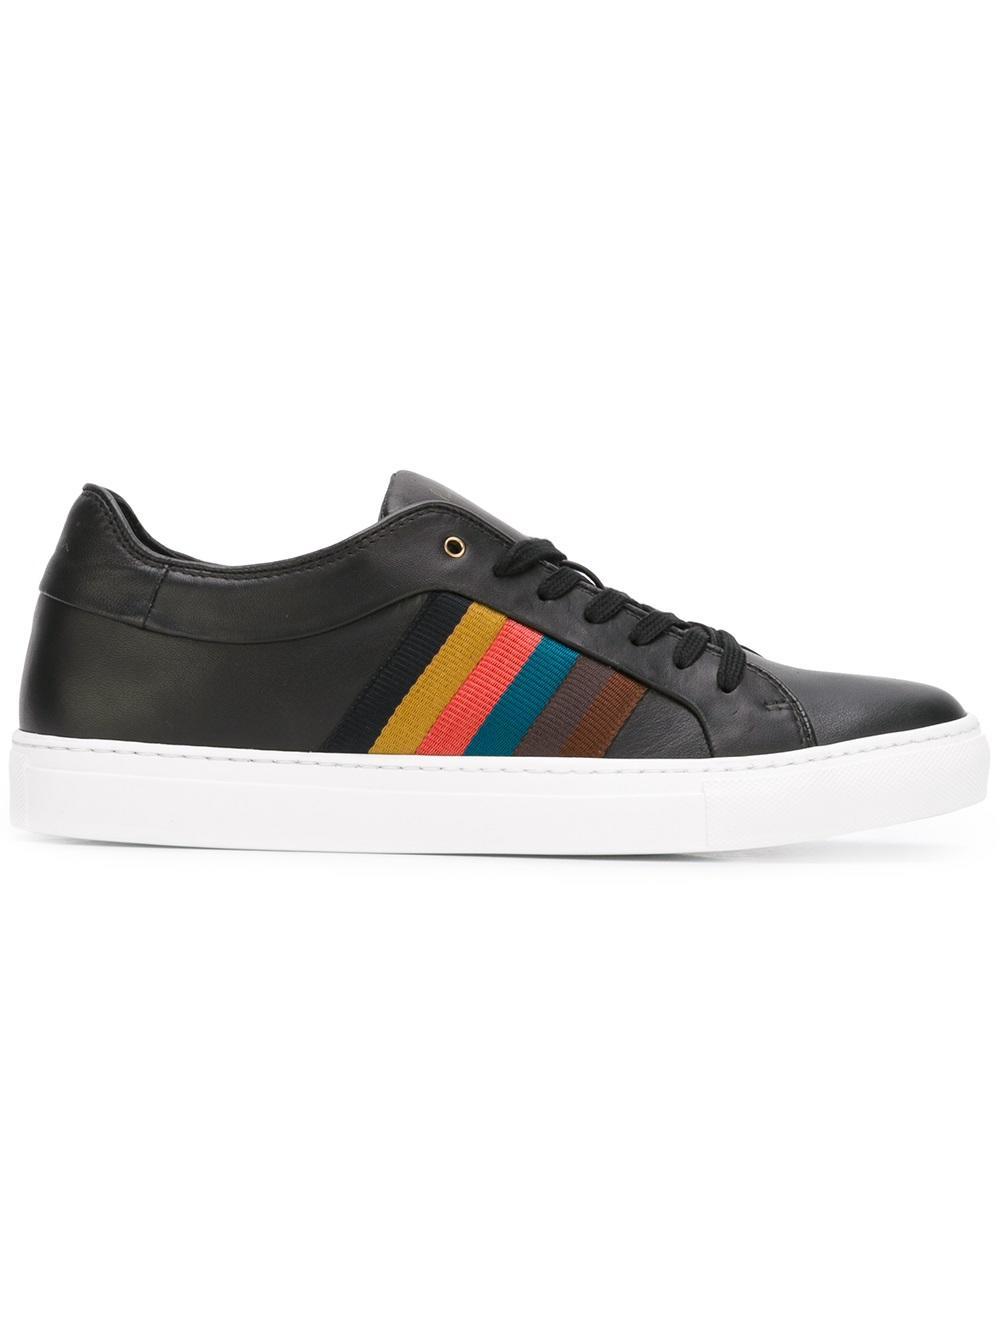 Lyst - Paul Smith Striped Laterals Sneakers in Black for Men